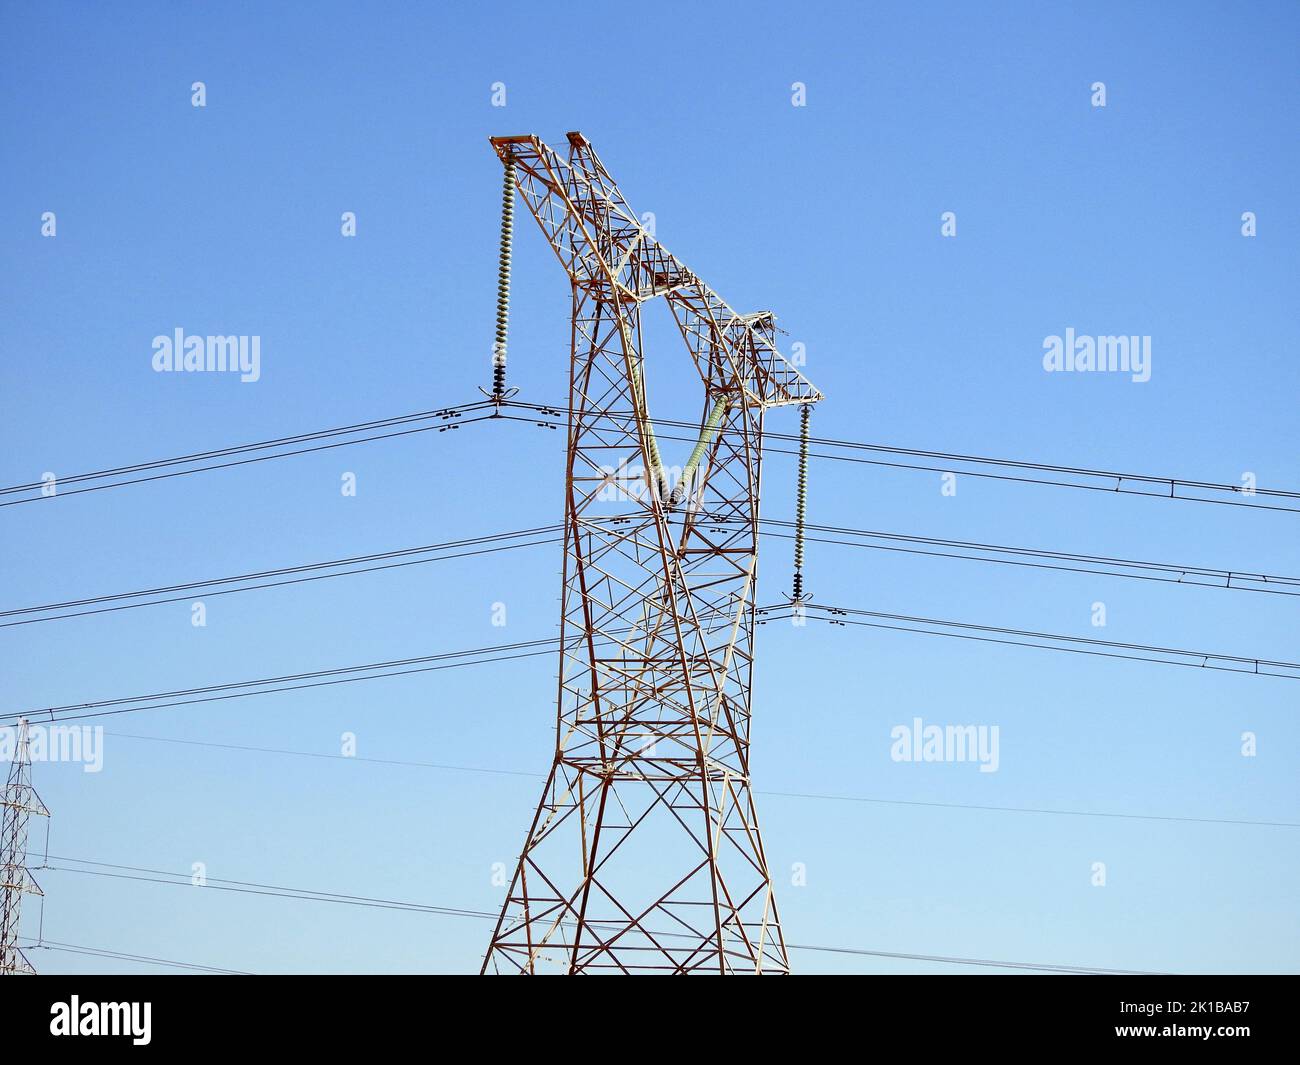 A transmission tower, electricity pylon which is a tall steel lattice structure that used to support overhead high voltage power lines, high voltage e Stock Photo